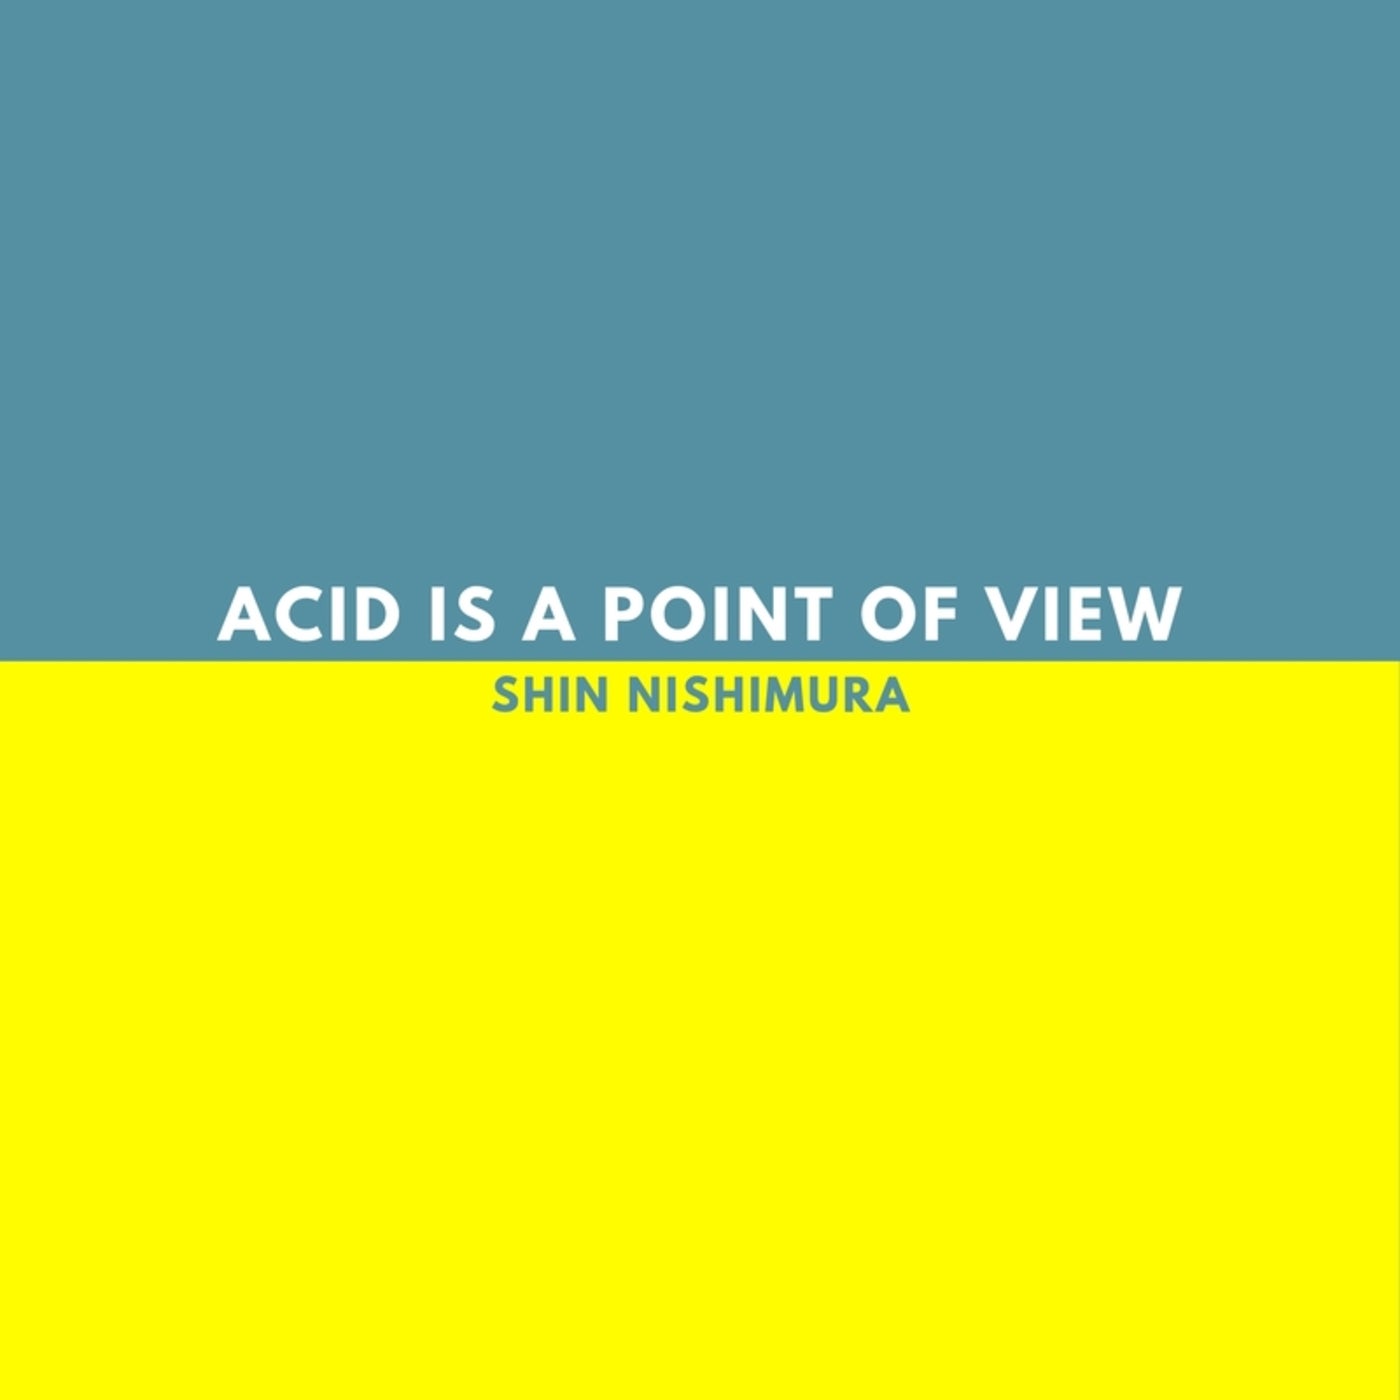 Acid is a Point of View